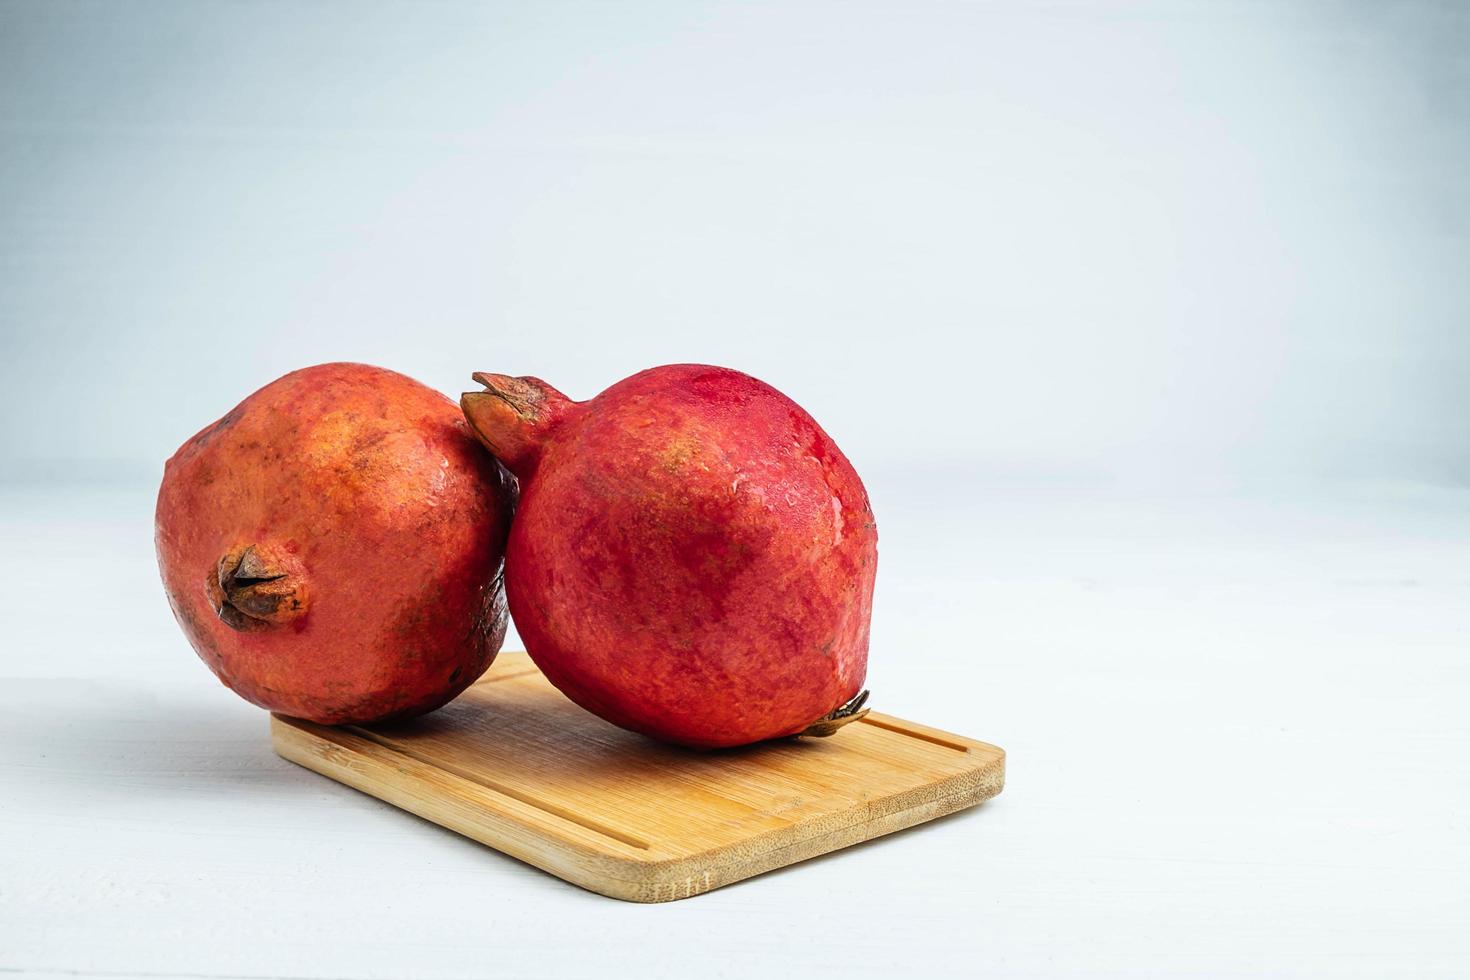 Pomegranate fruit on a wooden board photo